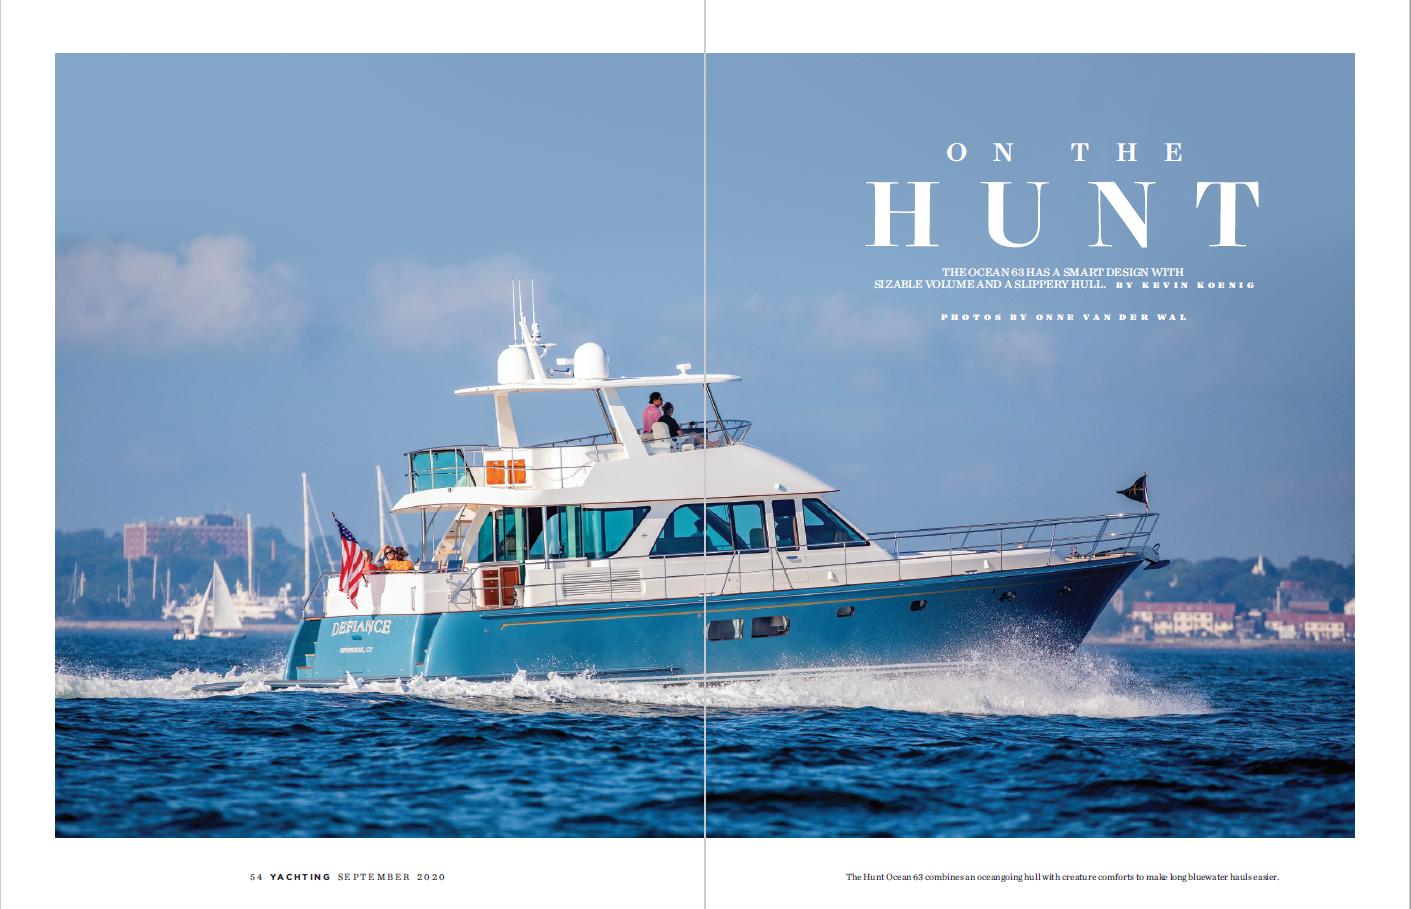 YACHTING: ON THE HUNT